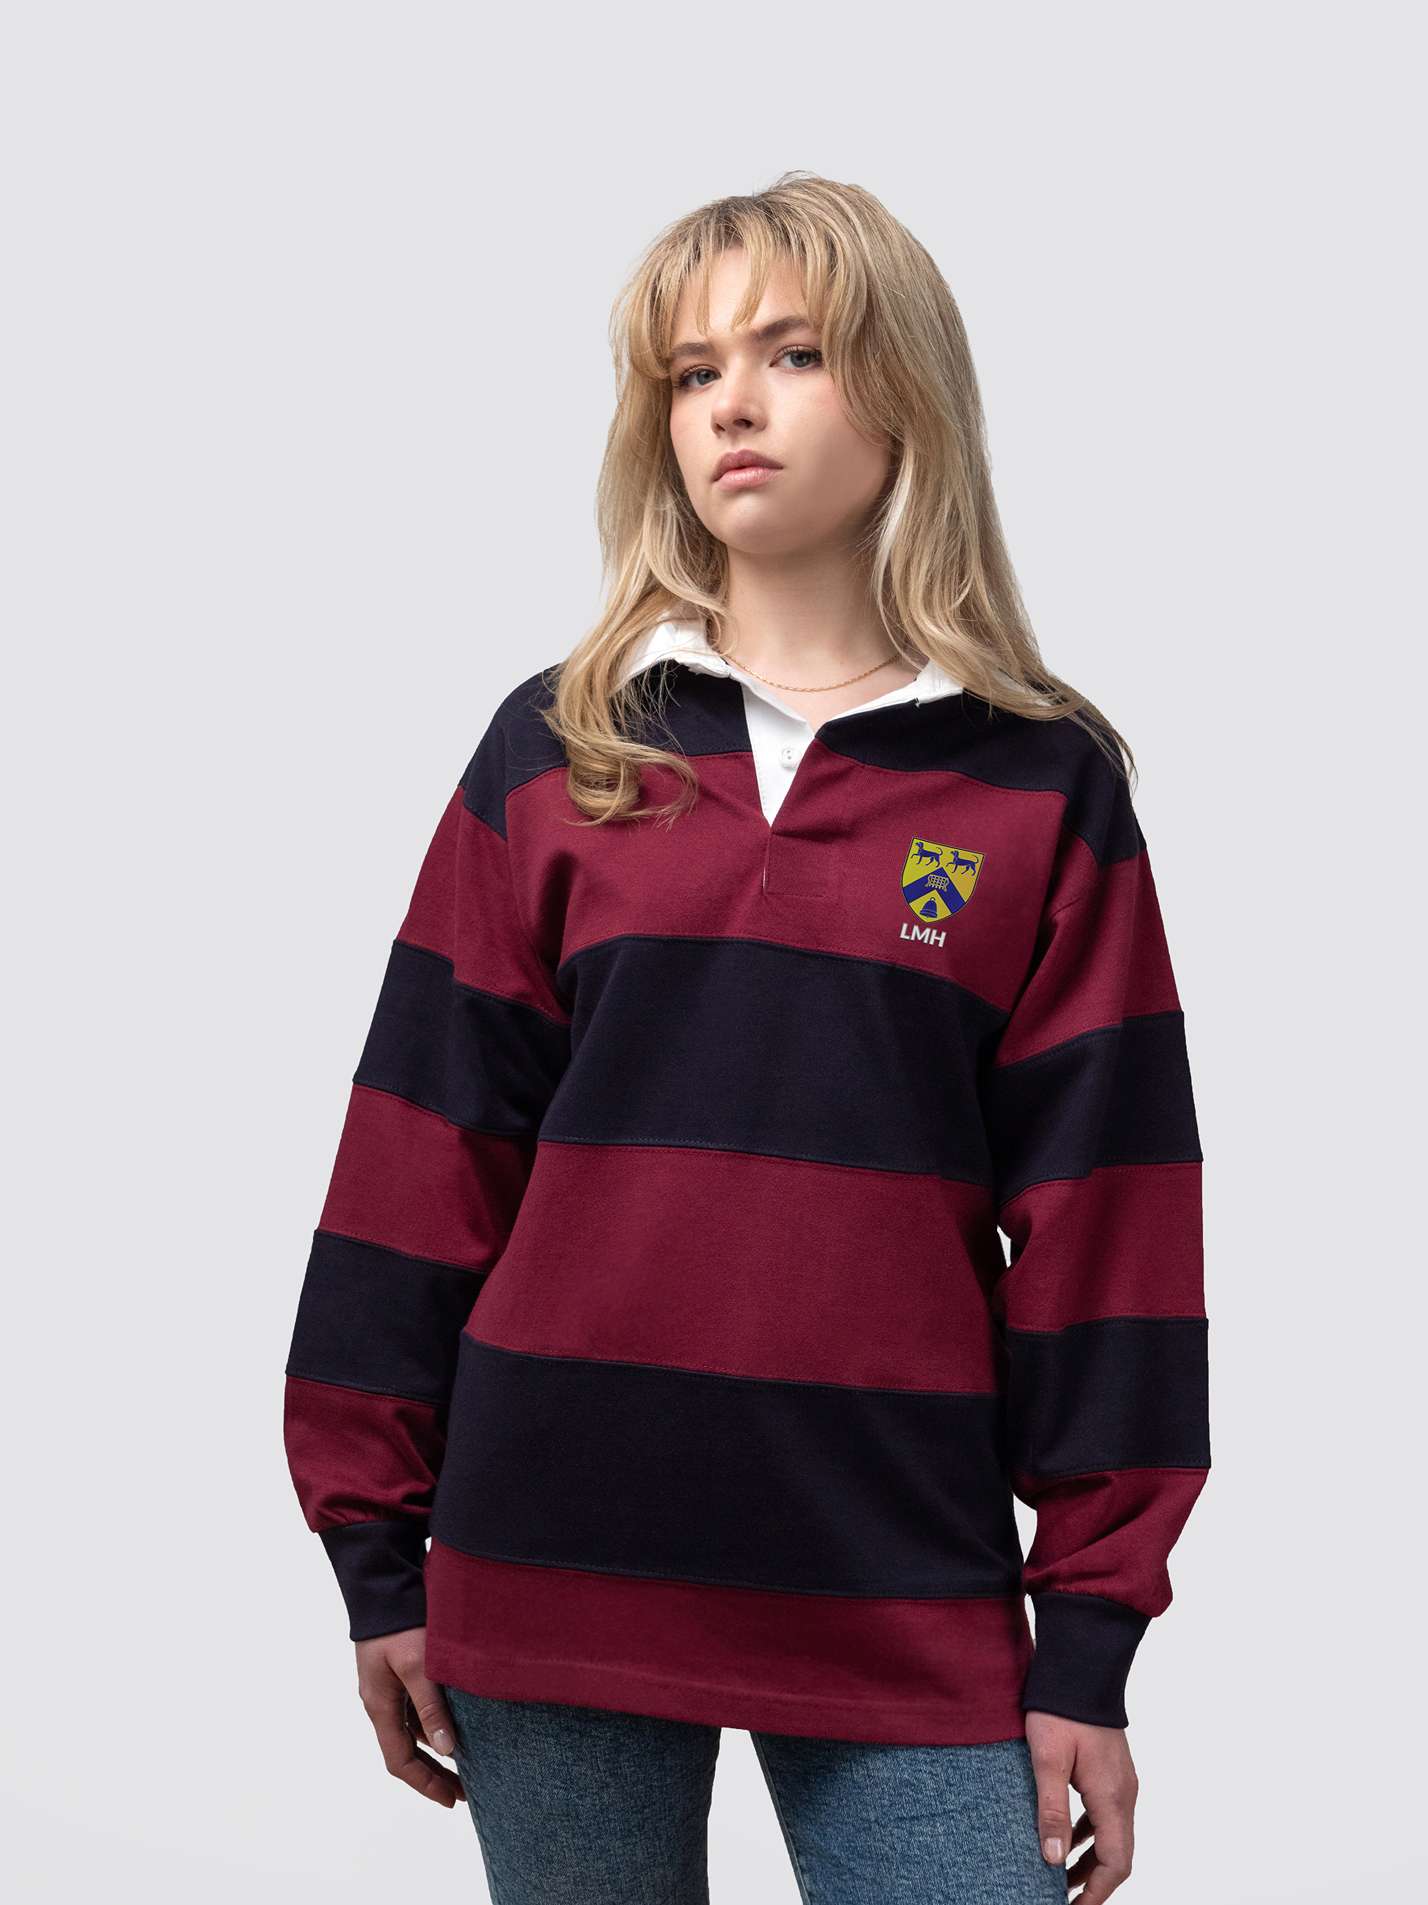 Lady Margaret Hall Oxford Unisex Striped Rugby Shirt